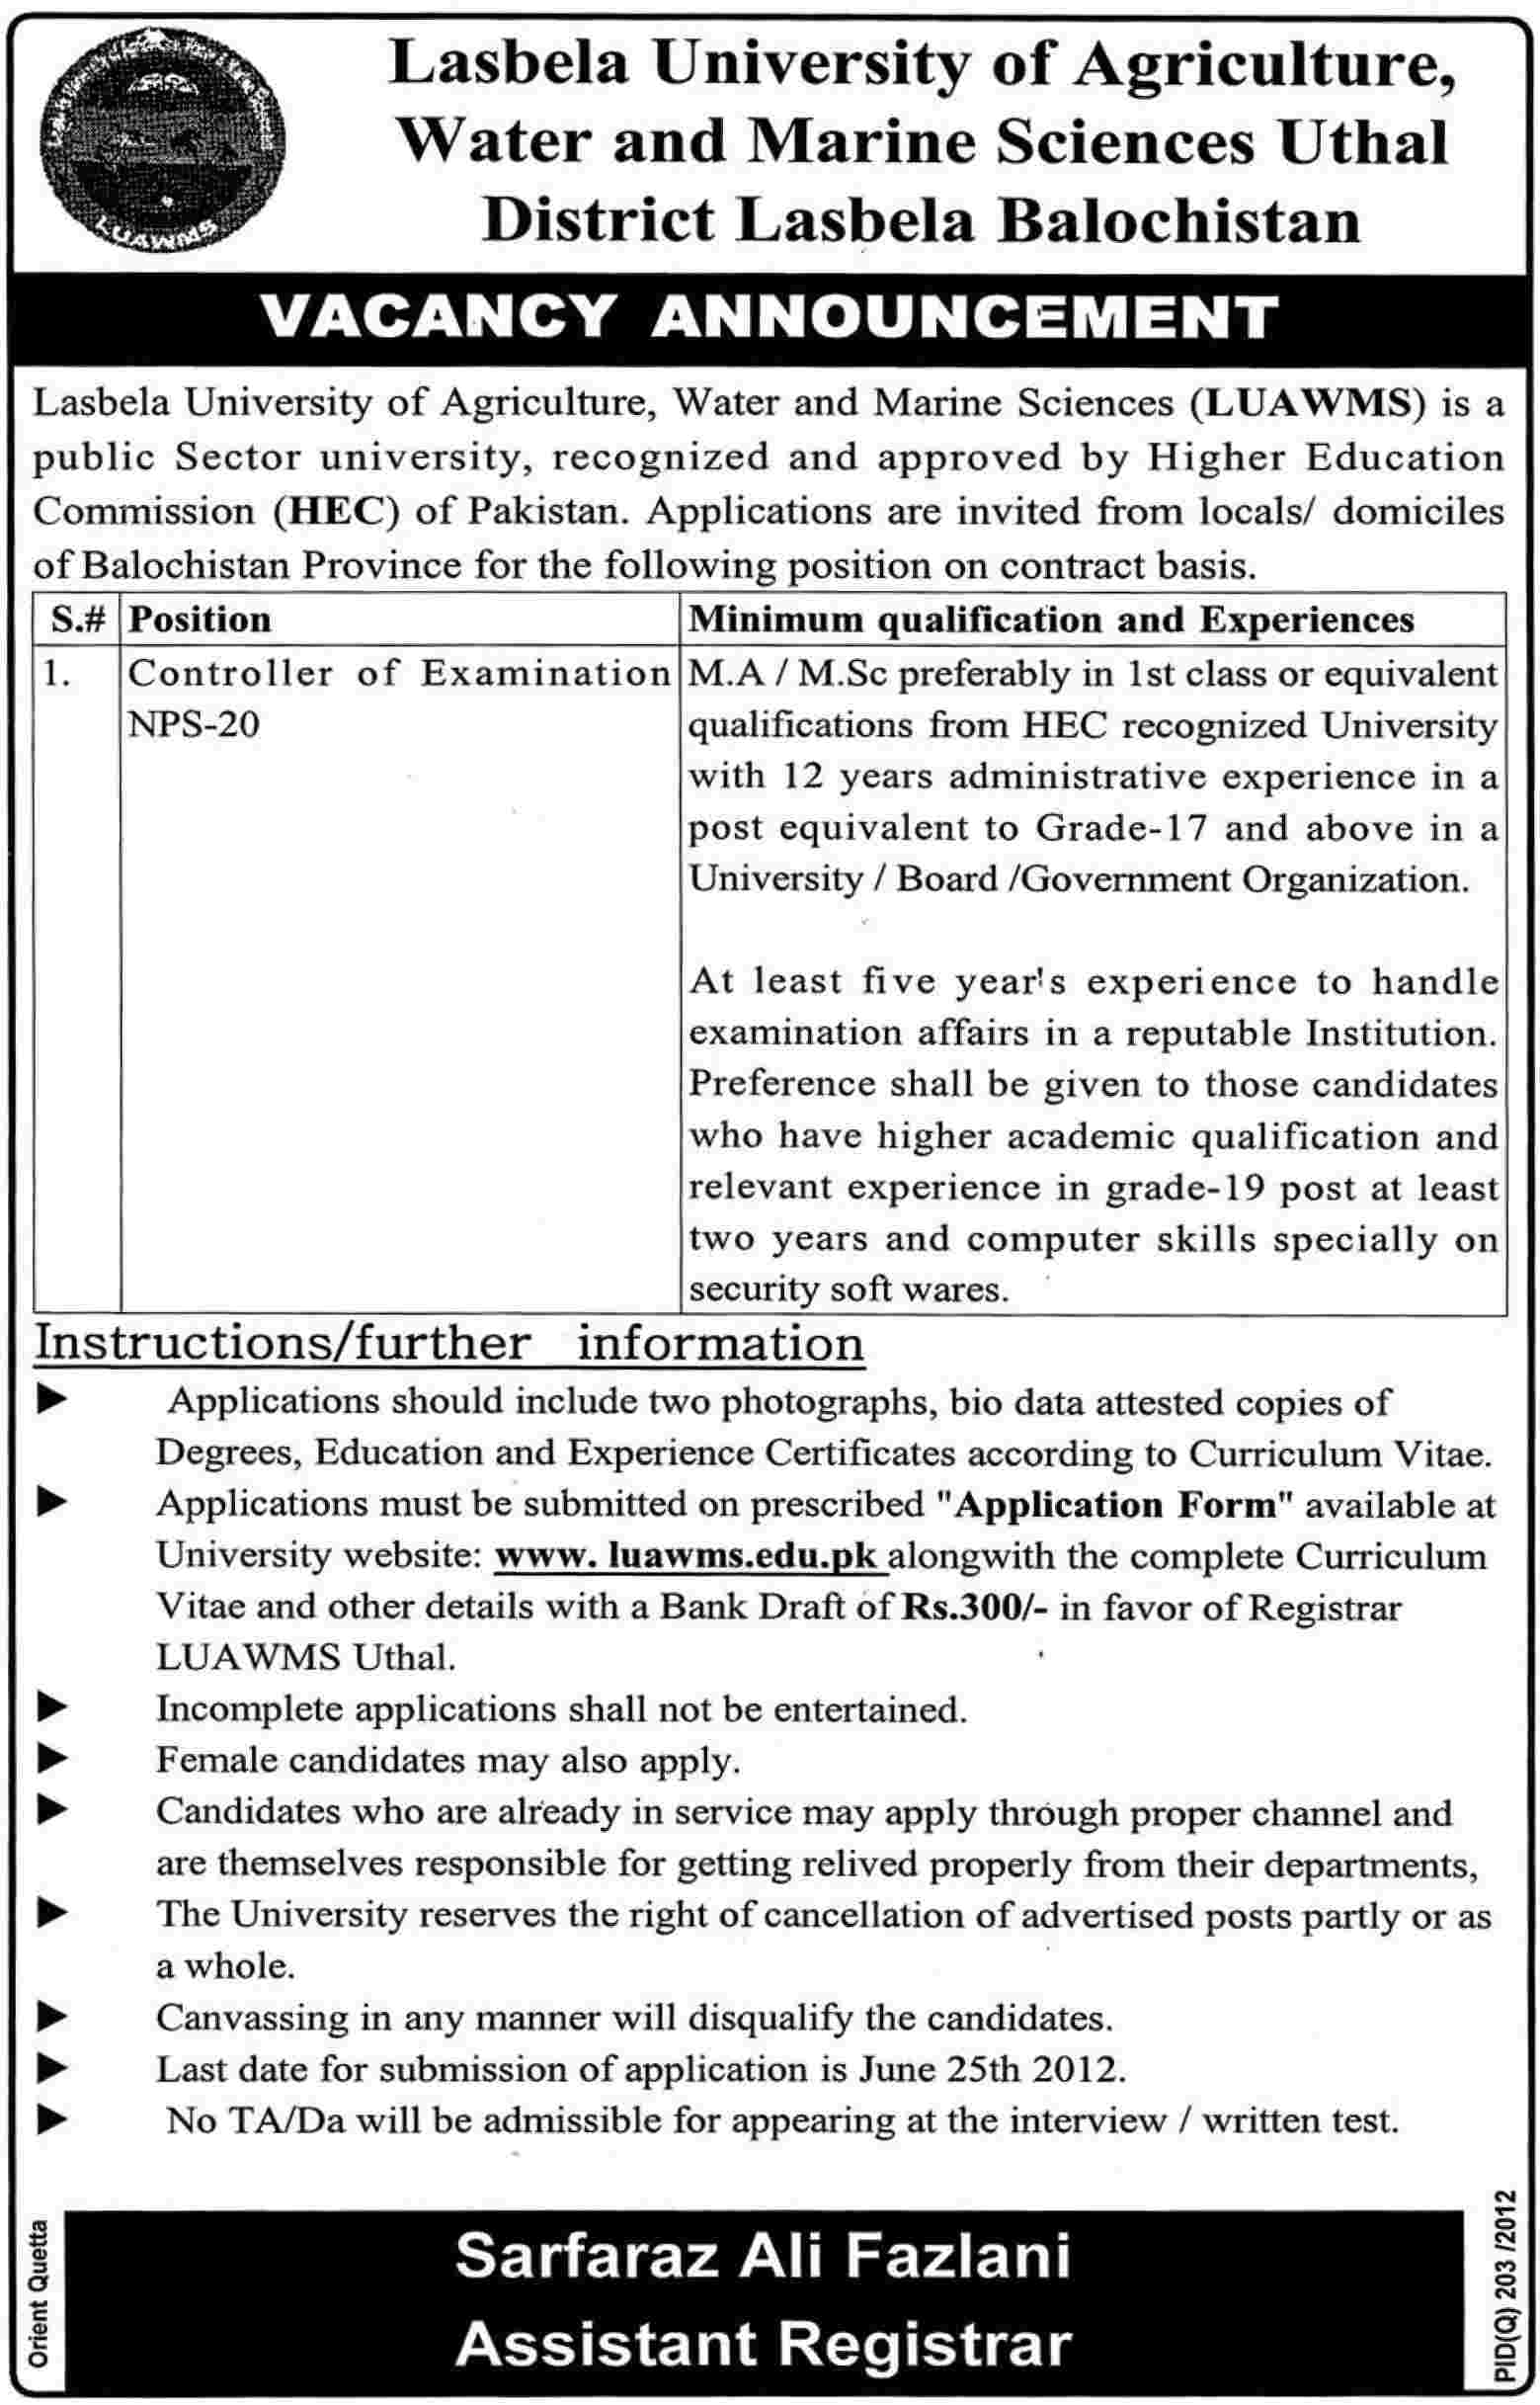 Controller of Examinations Required at (LUAWMS) (Lasbela University of Agriculture, Water and Marine Sciences)